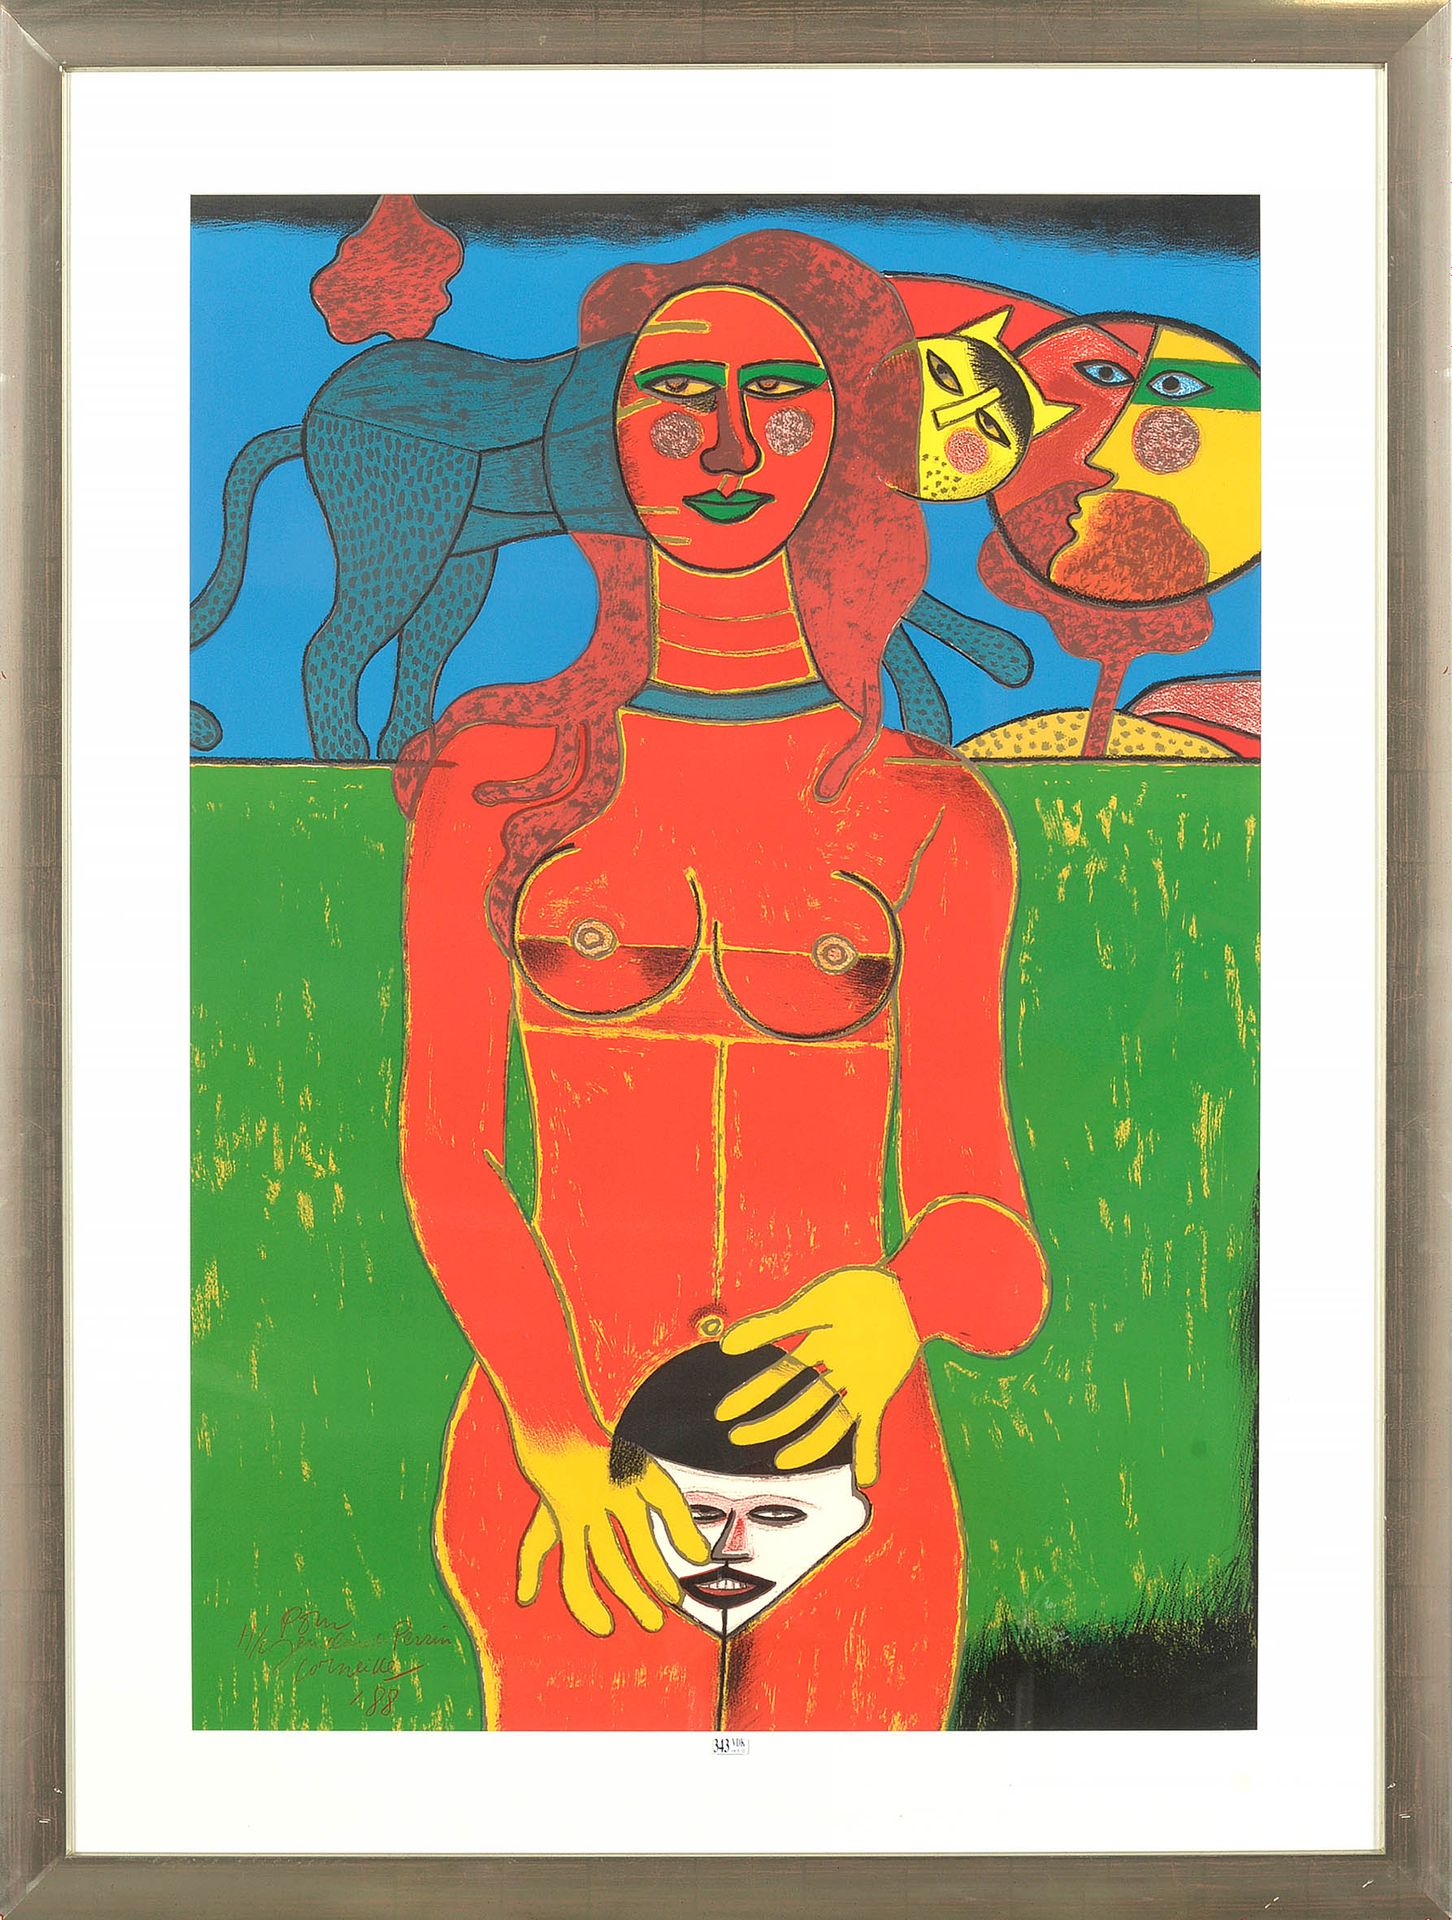 CORNEILLE (1922 - 2010) "Naked woman holding a mask" large lithograph in colors &hellip;